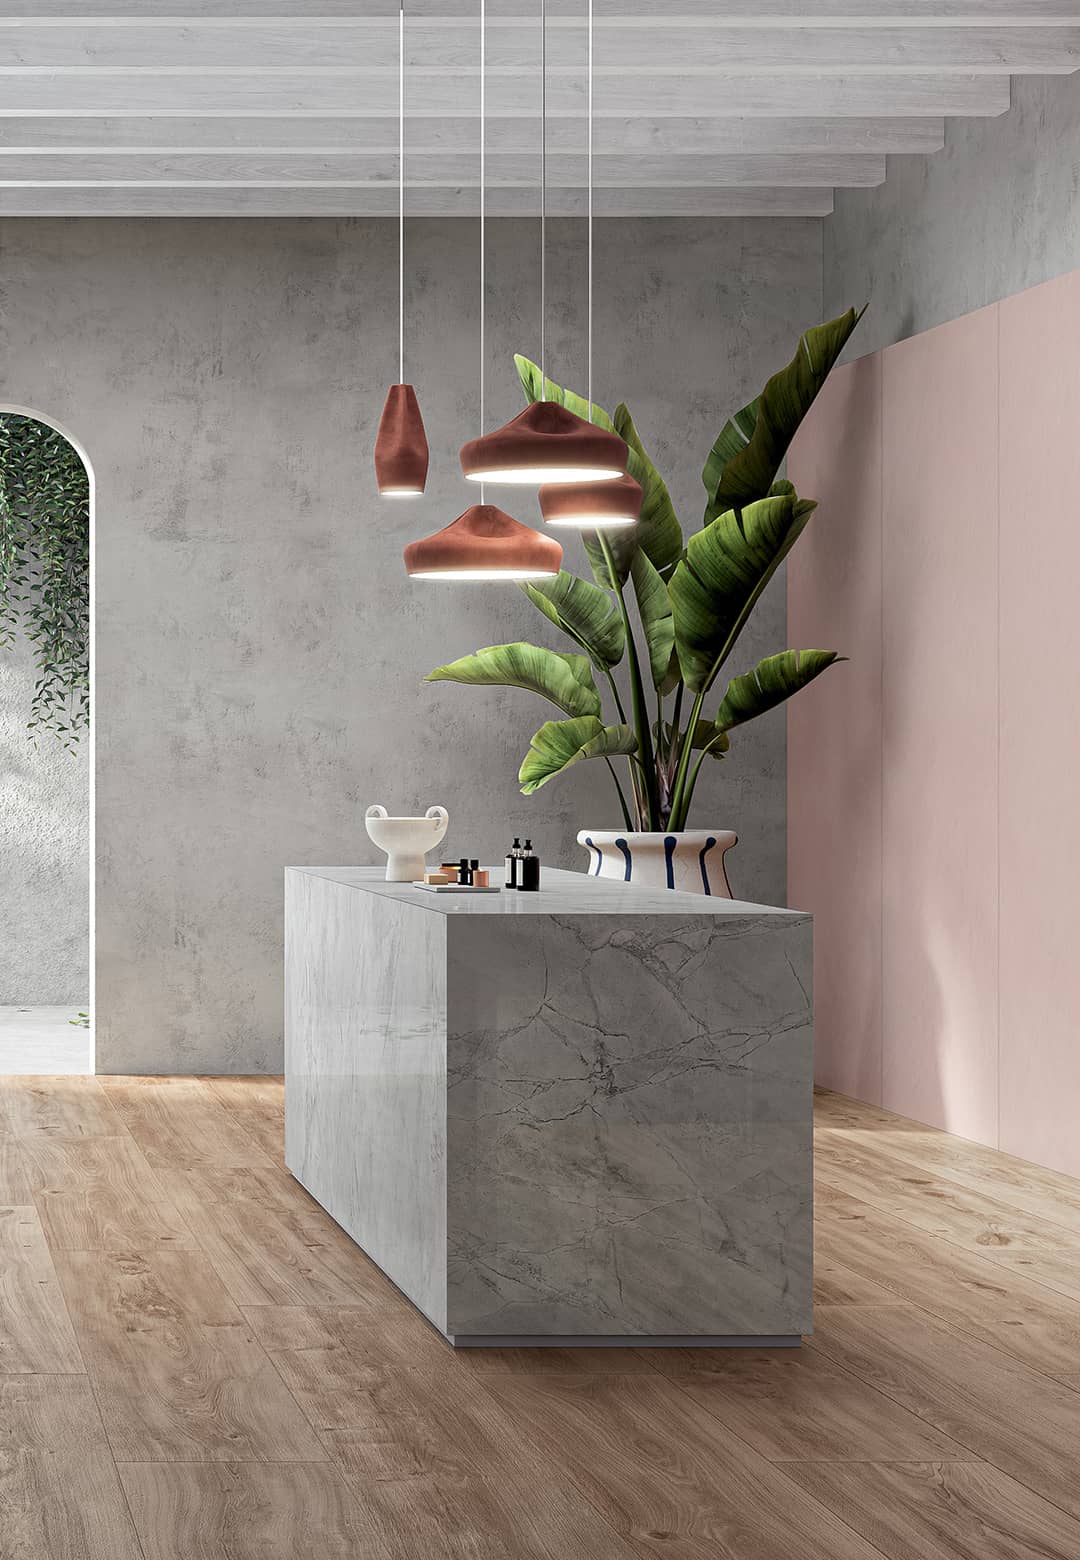 Ceramica Fondovalle plays with texture, shape, and colour at Cersaie 2021